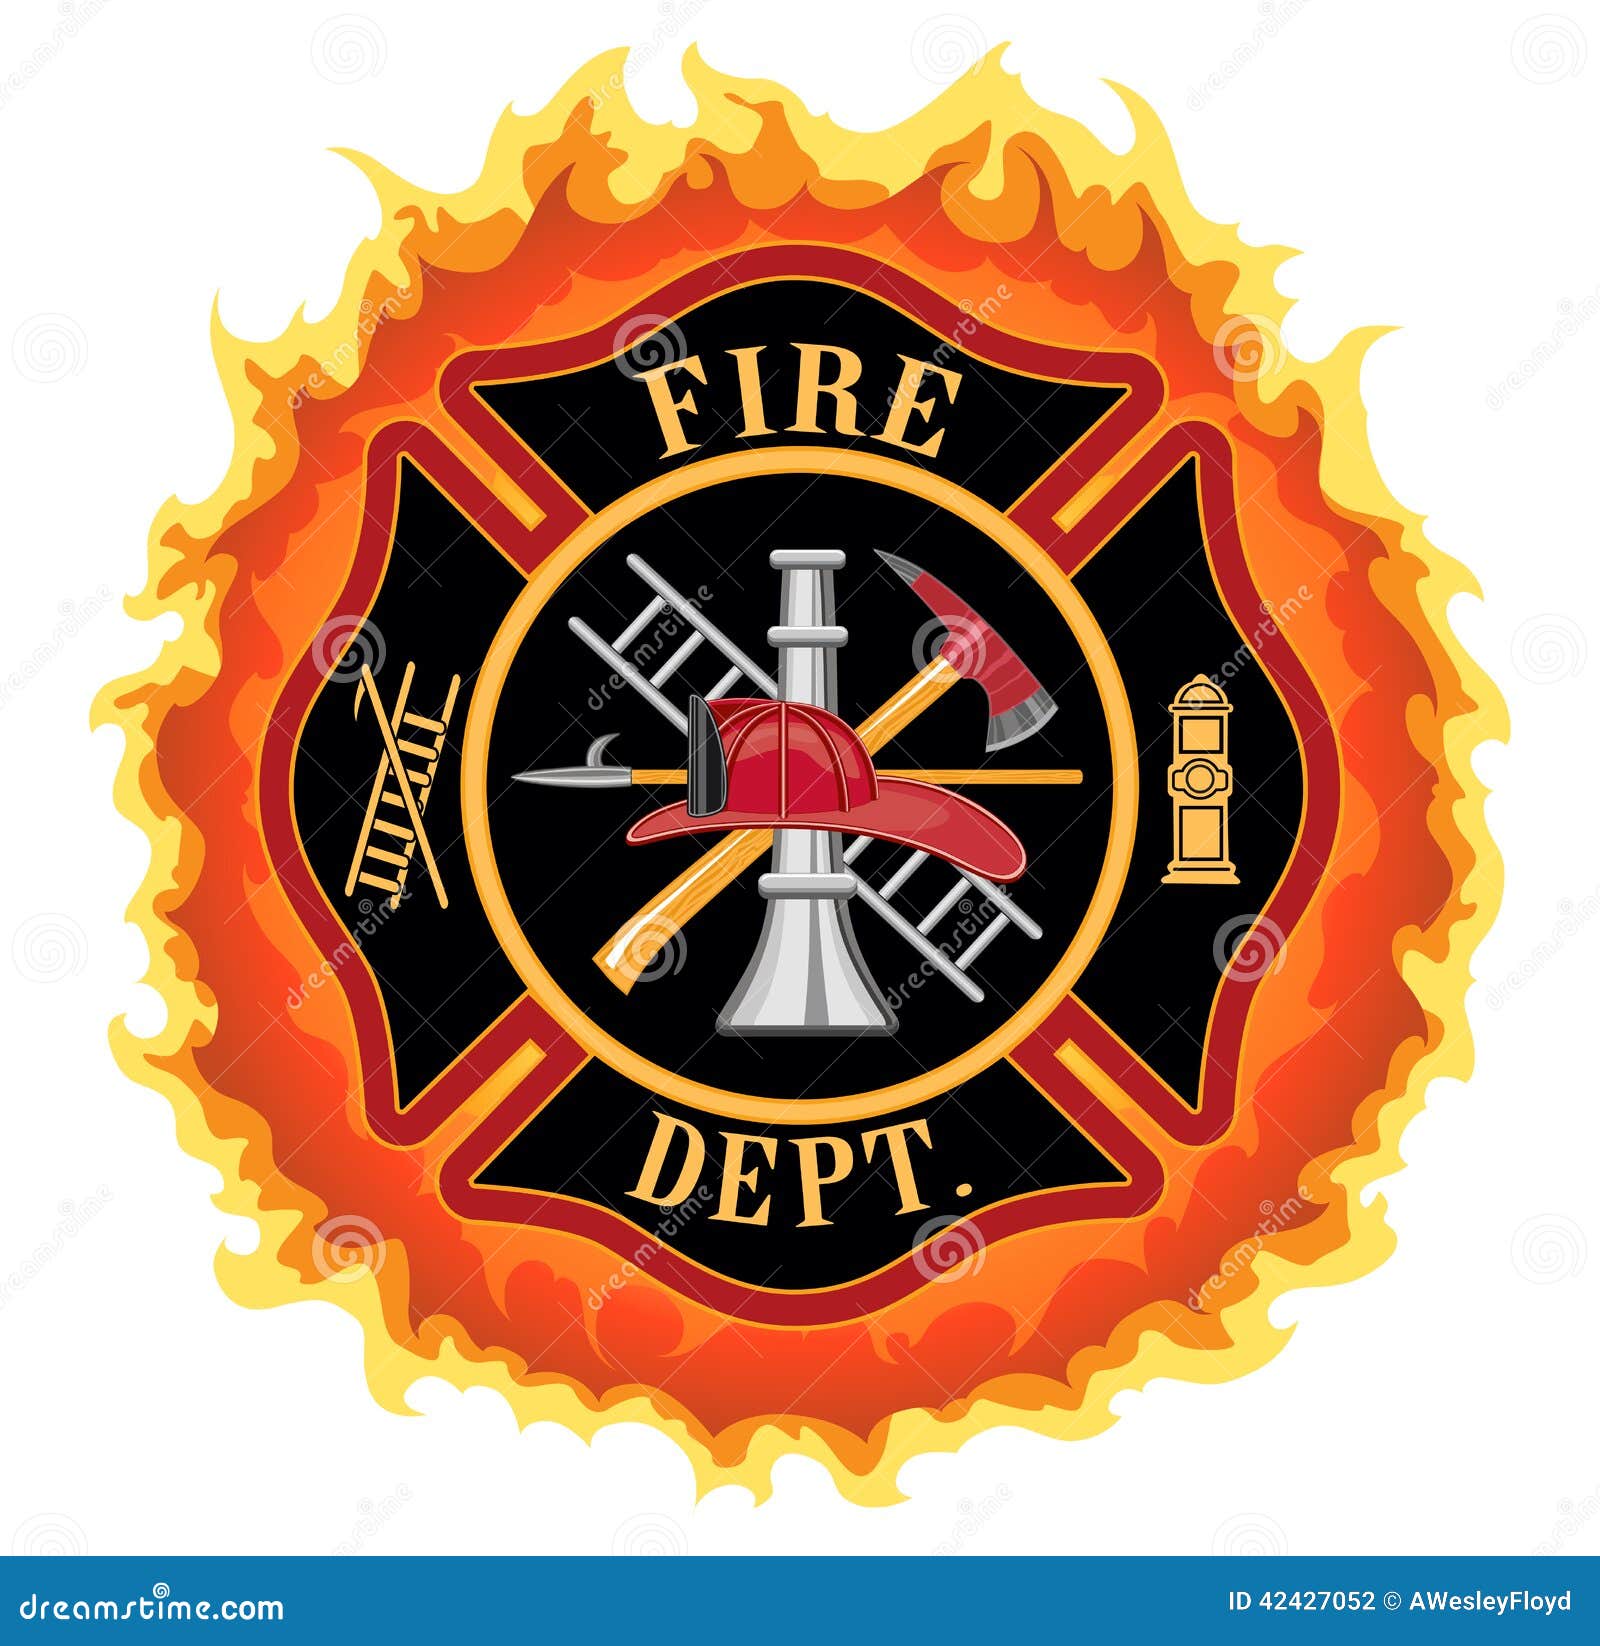 Firefighter Cross with Flames Stock Vector - Illustration of ...